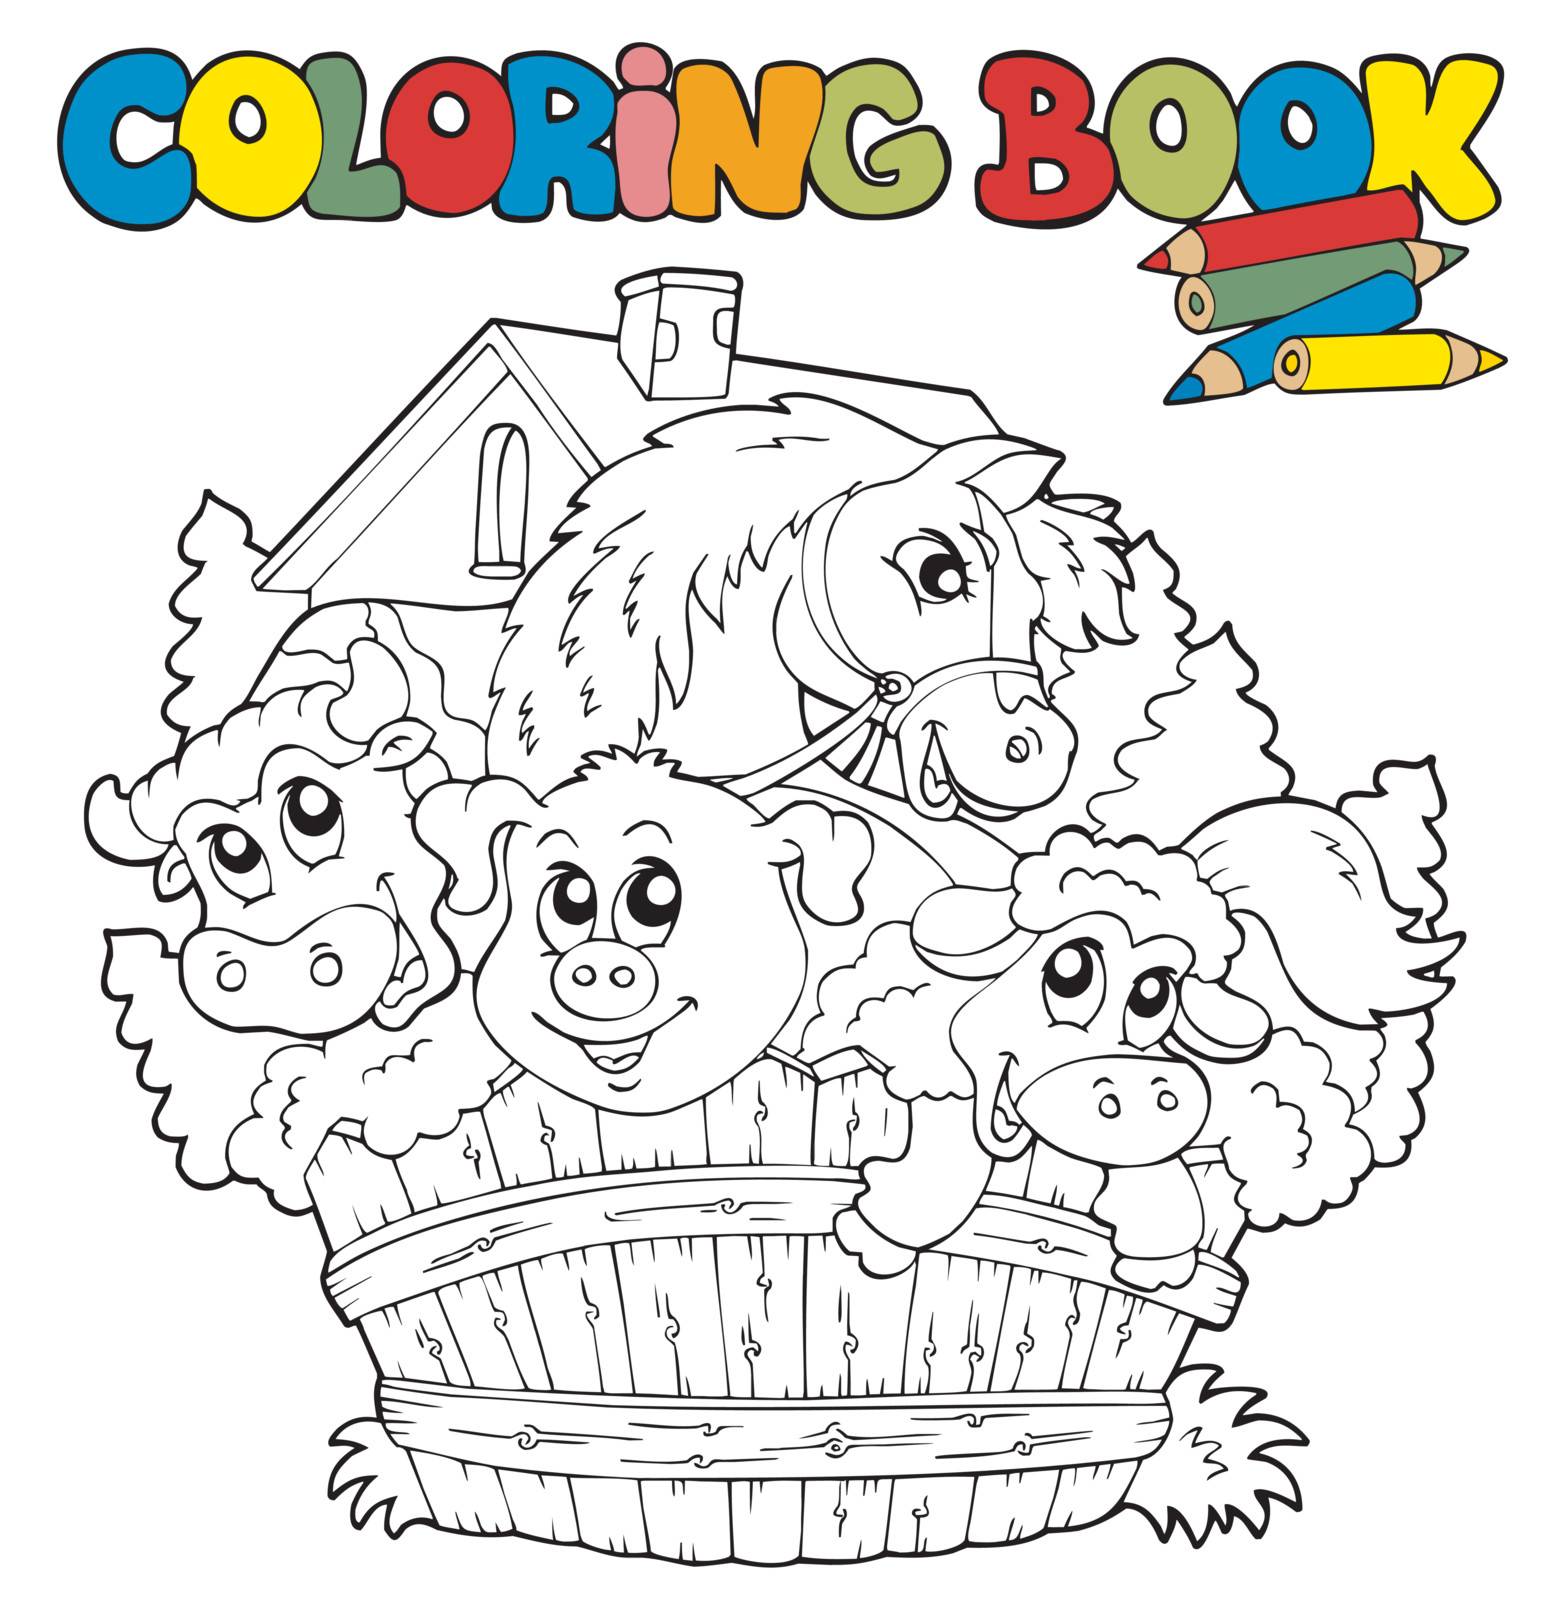 Coloring book with cute animals 2 - vector illustration.